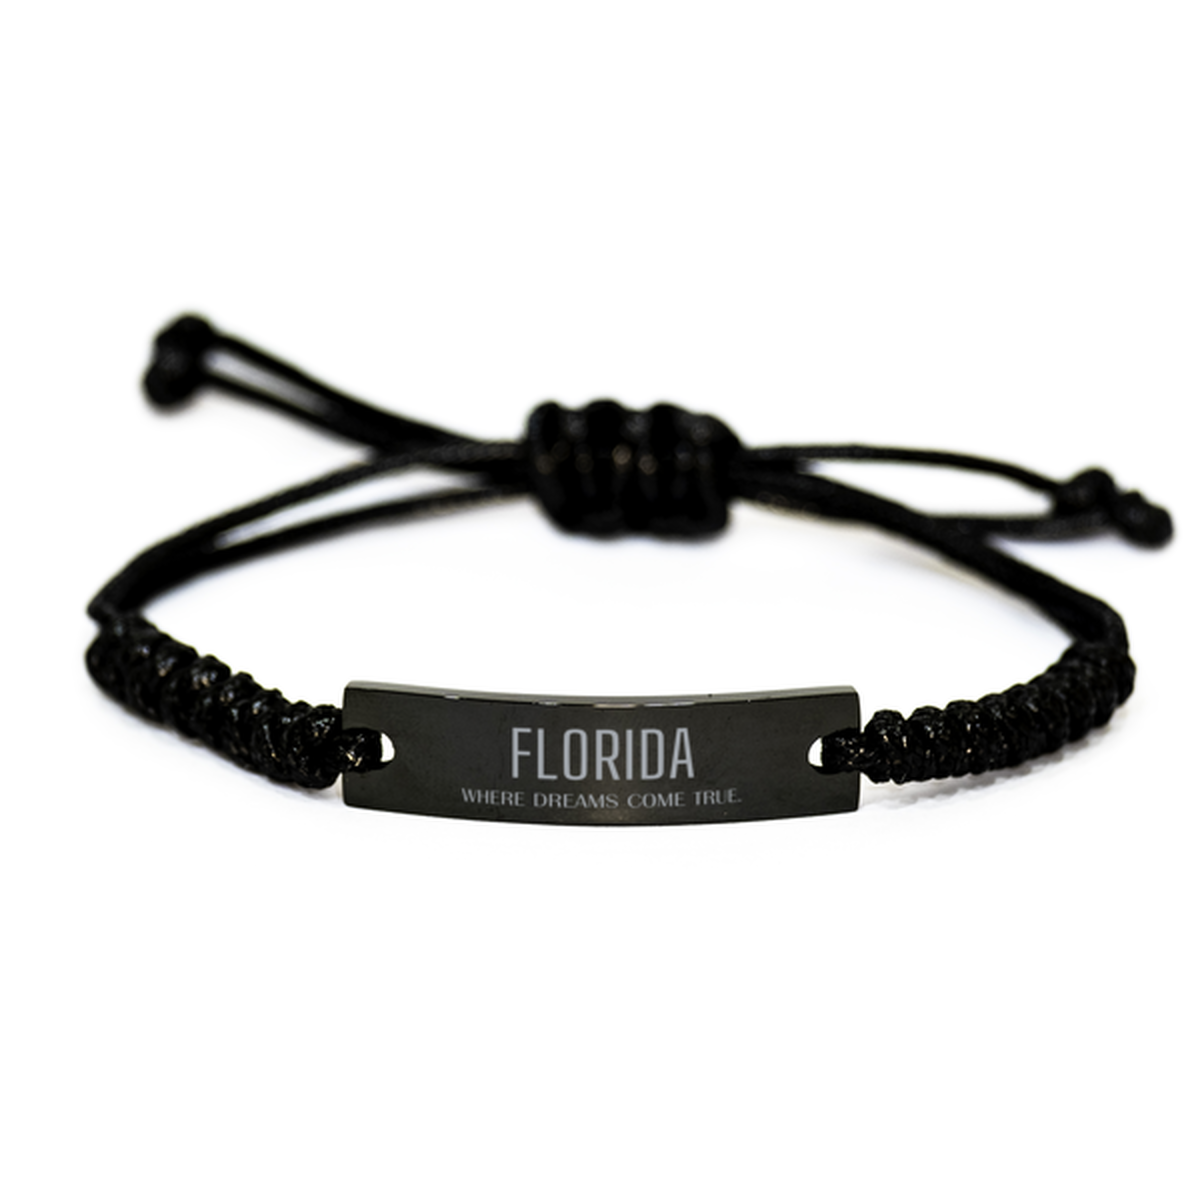 Love Florida State Black Rope Bracelet, Florida Where dreams come true, Birthday Inspirational Gifts For Florida Men, Women, Friends